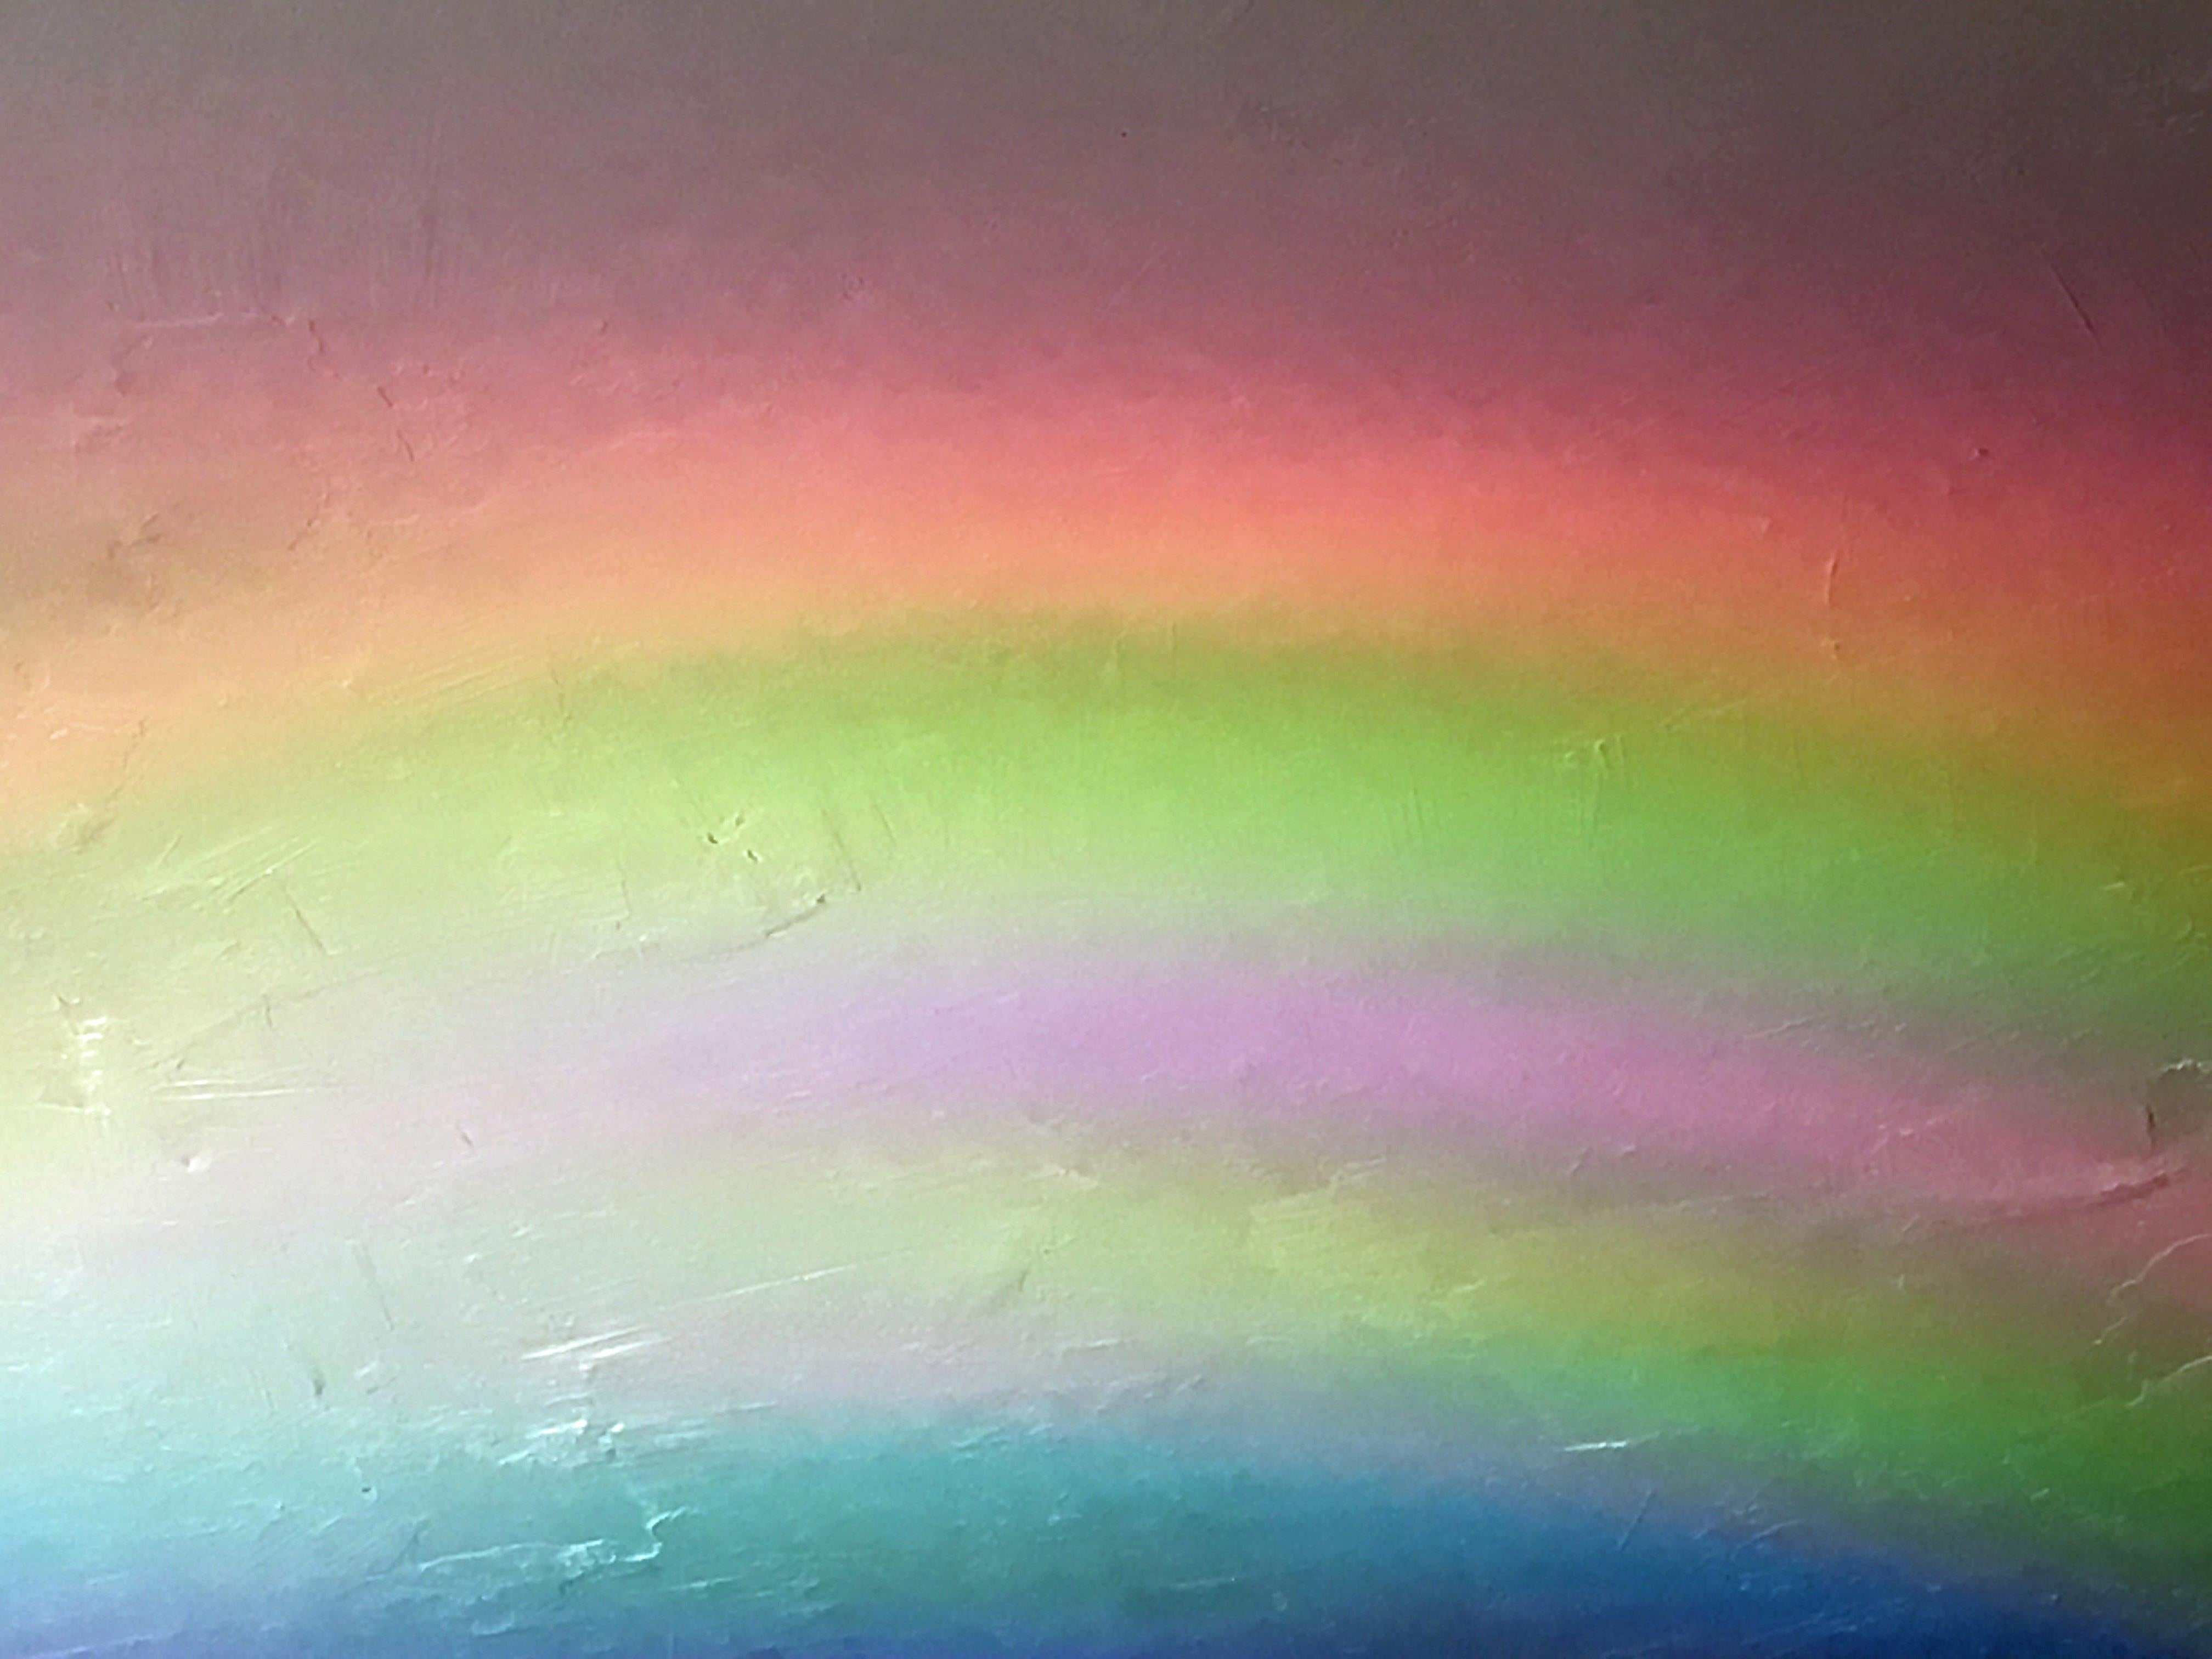 Andra Samelson, Jal n°5, impression pigmentaire d'art, Ed. 3/5, Rainbows reflections